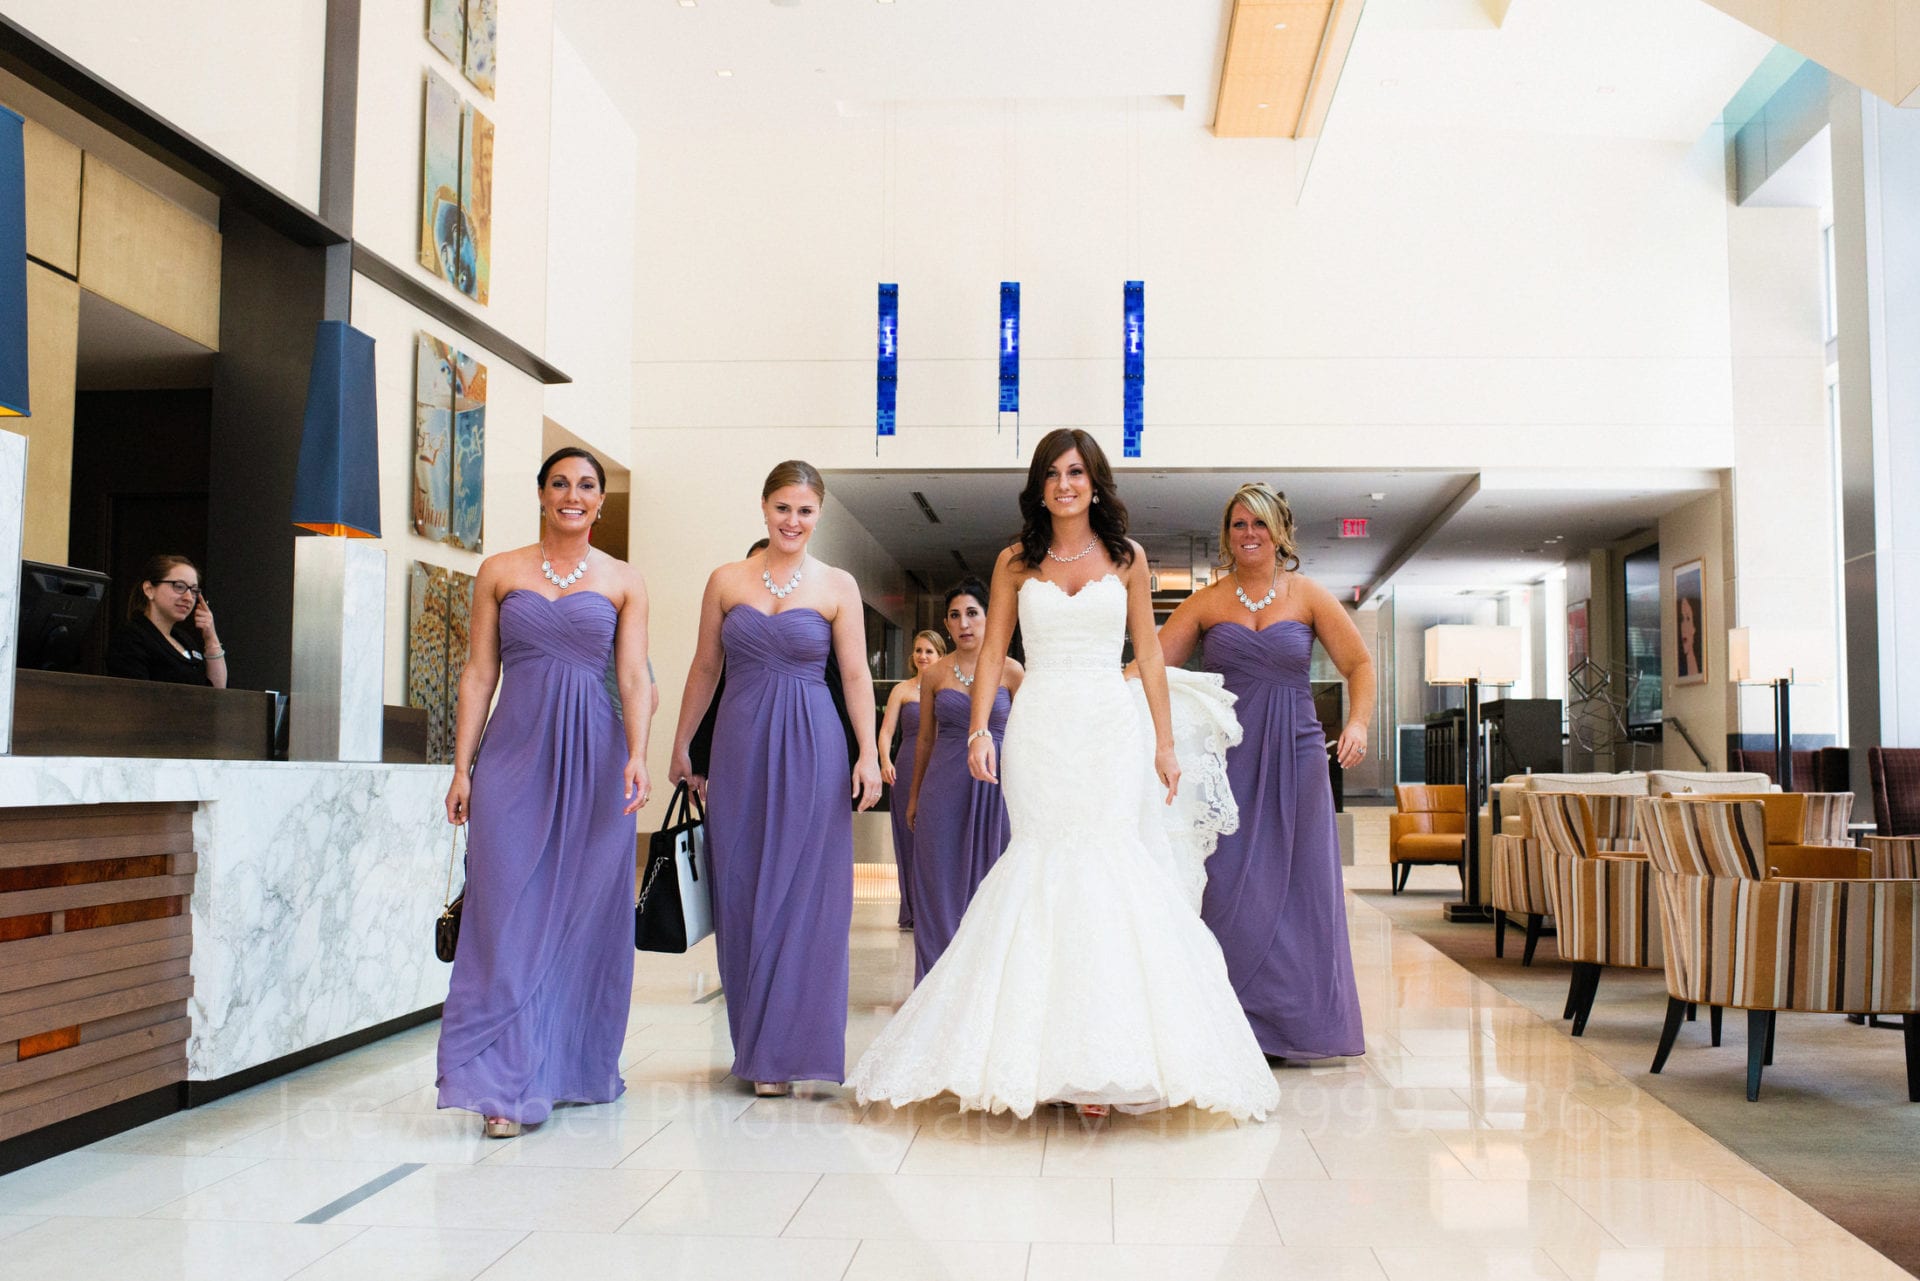 A bride and her purple-dressed bridesmaids walk through the lobby of the Fairmont Hotel in Pittsburgh Fairmont Hotel Pittsburgh Weddings